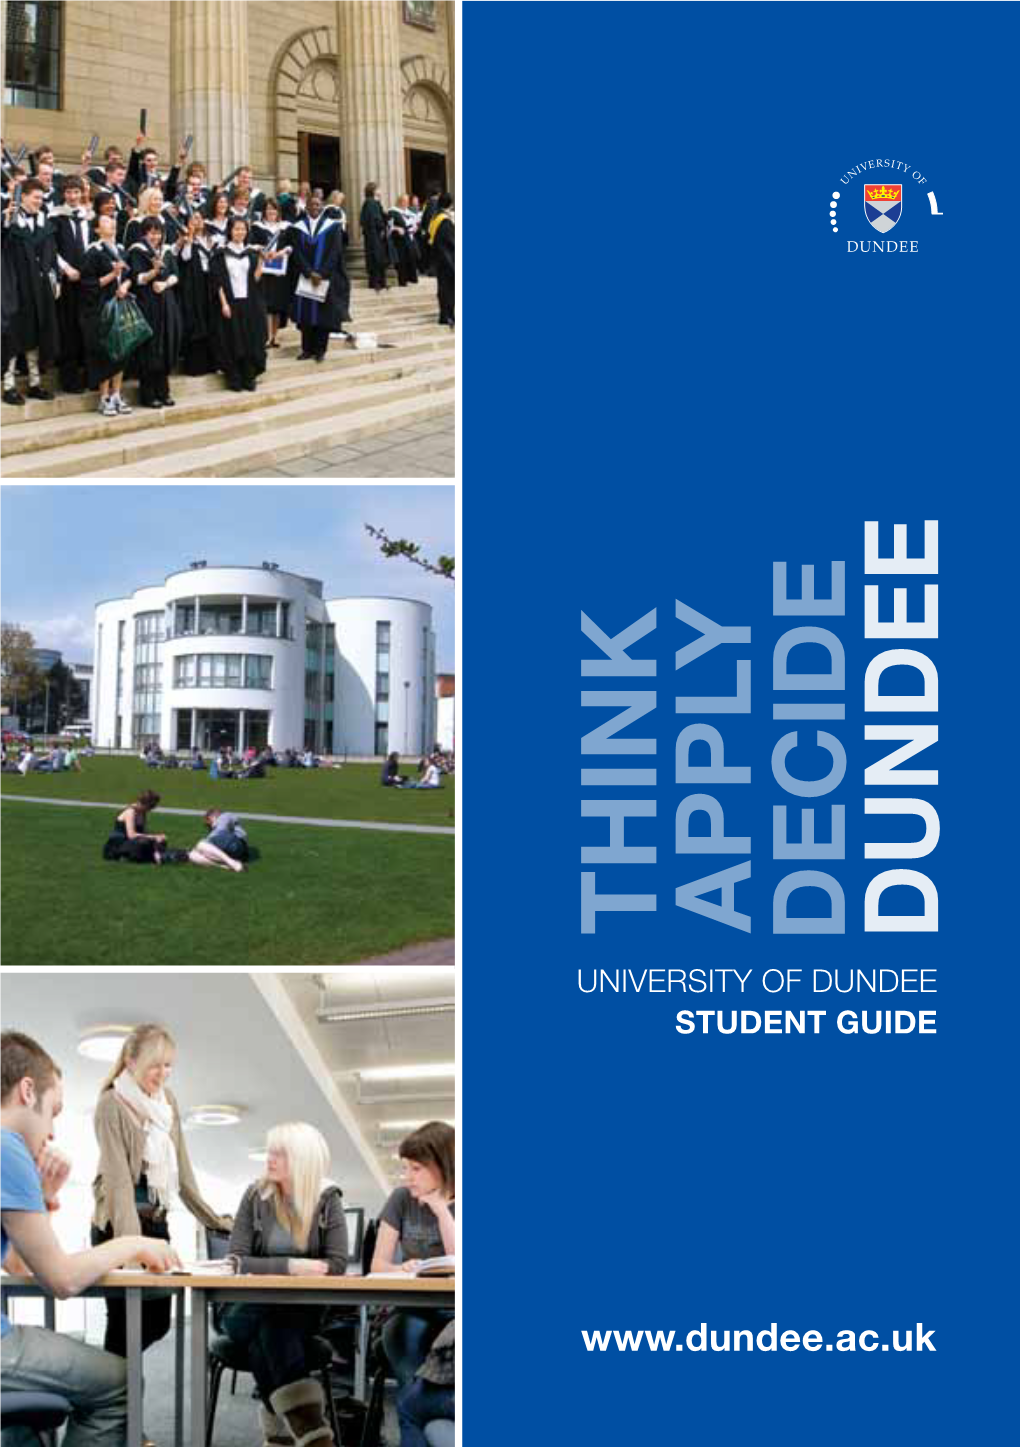 University of Dundee Student Guide